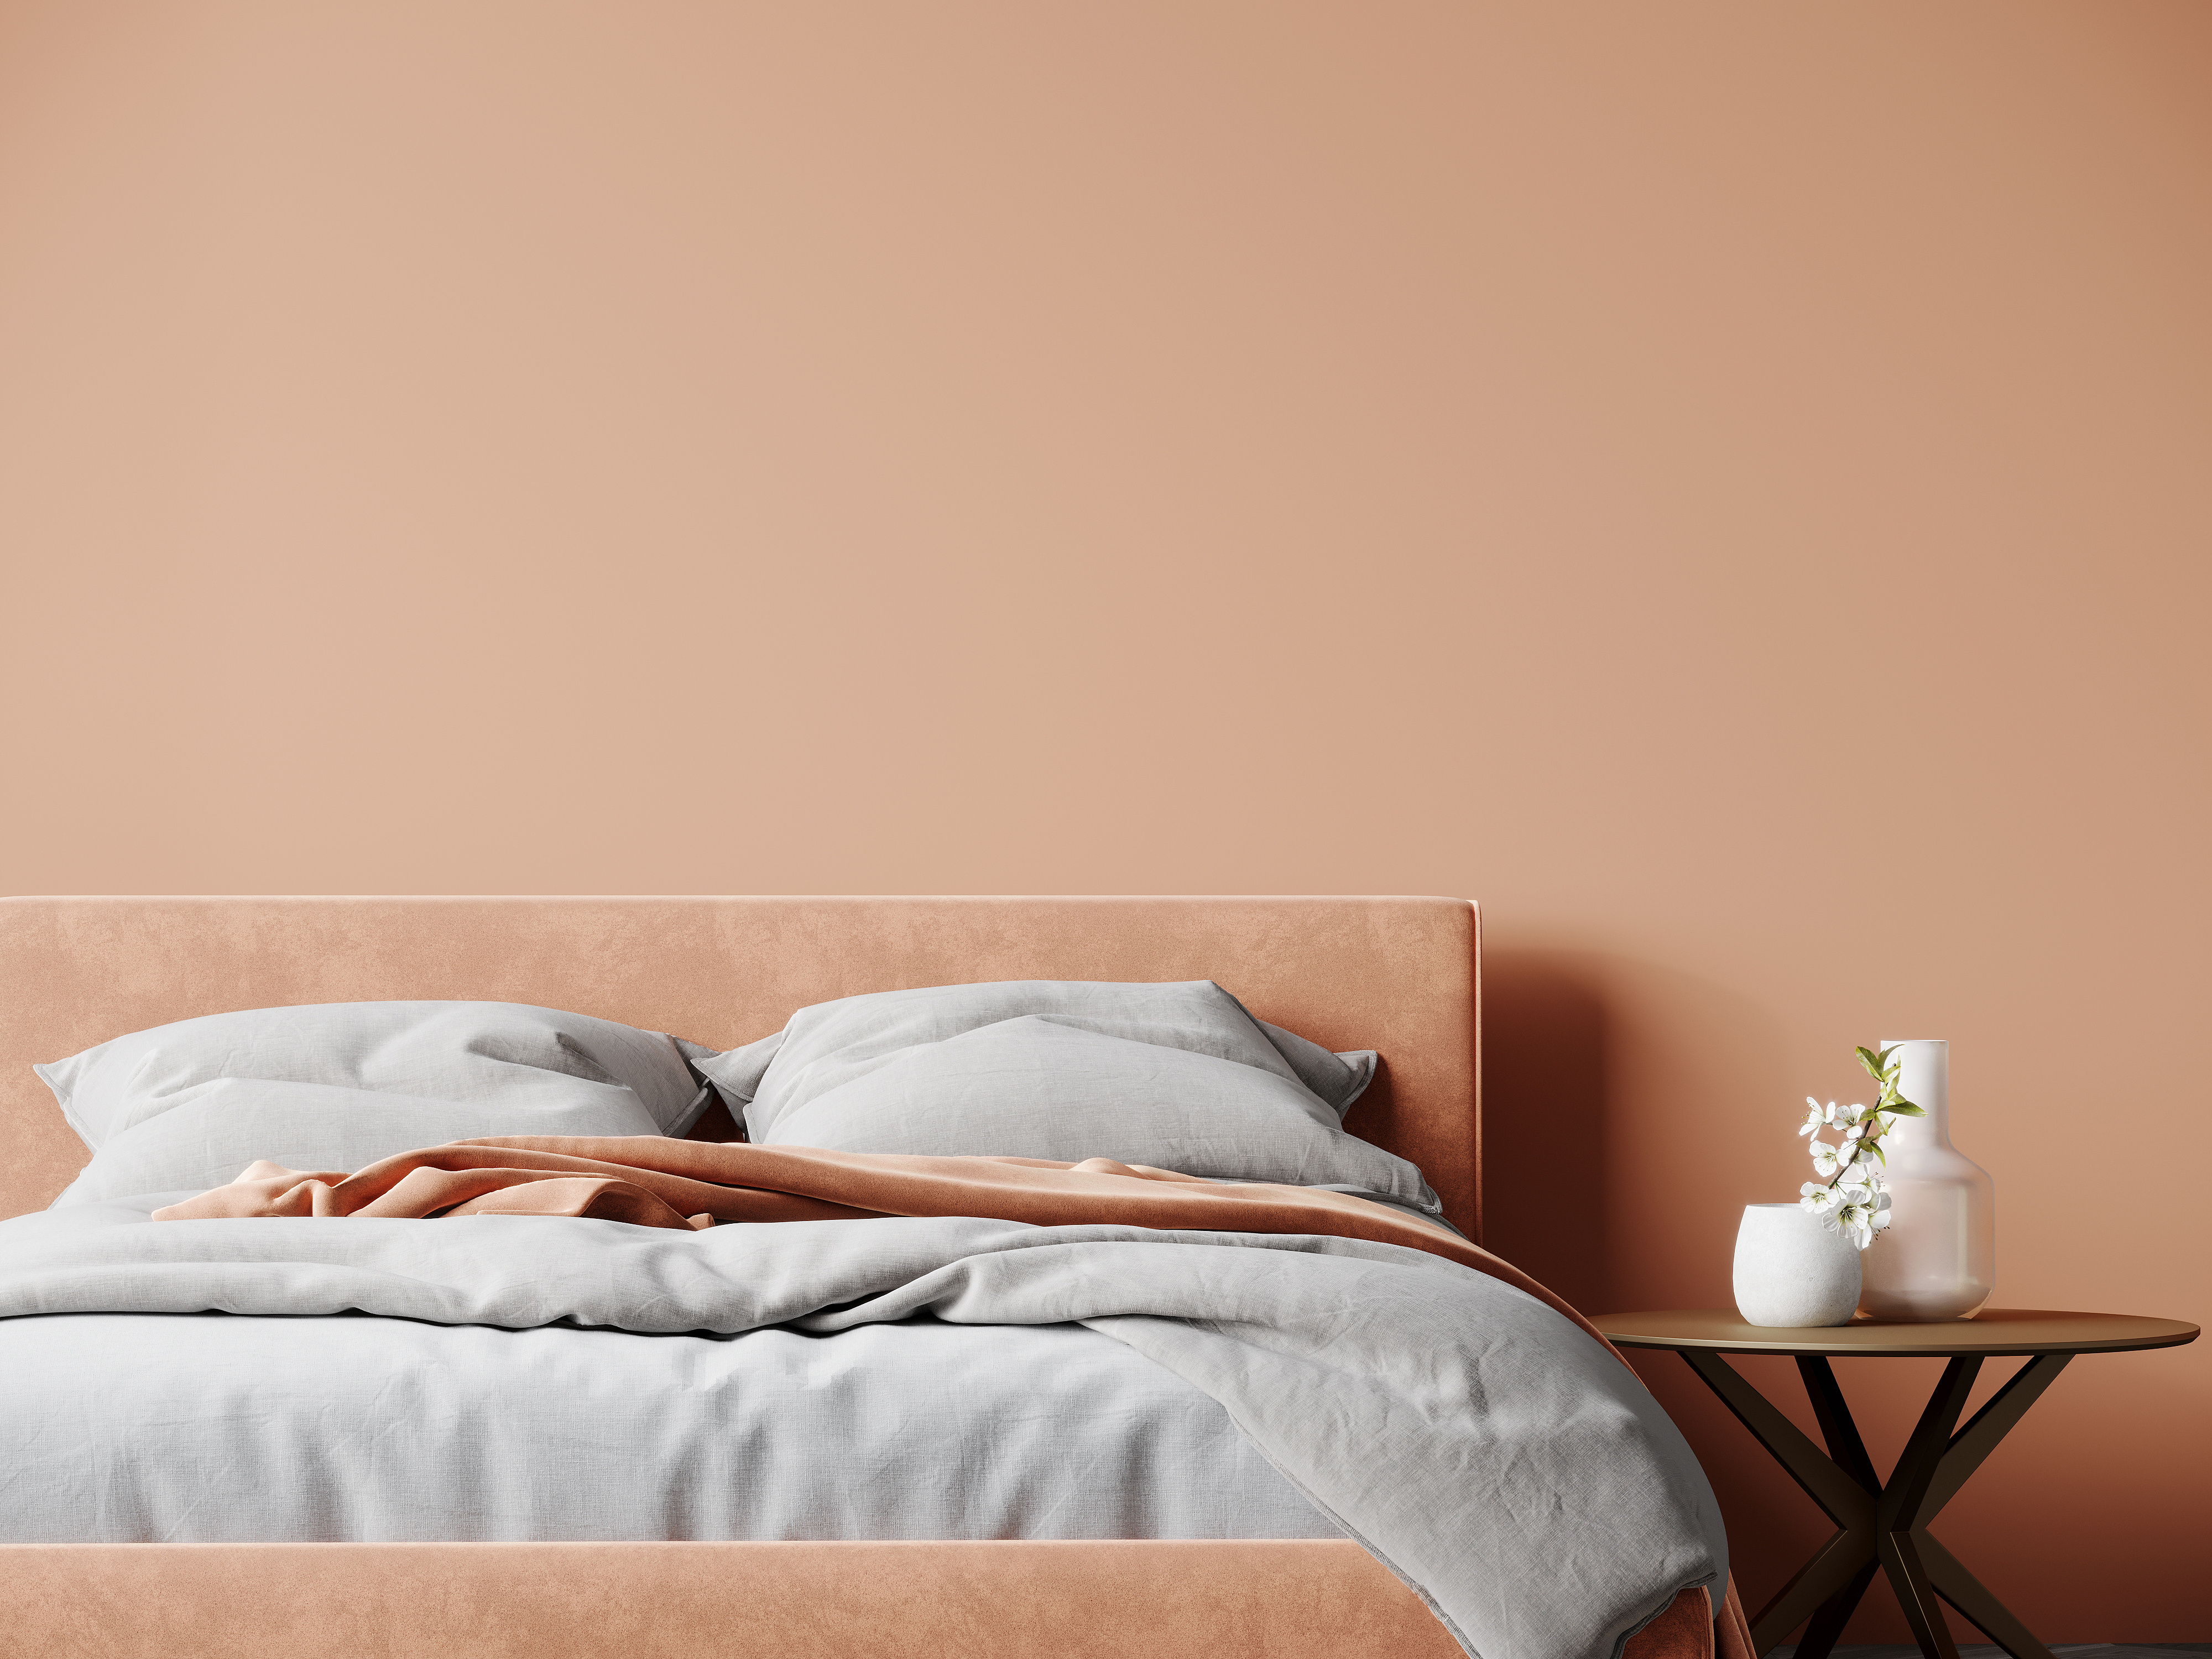 A peachy-beige beadframe rests against a wall of the exact same color for a stunning decor look.